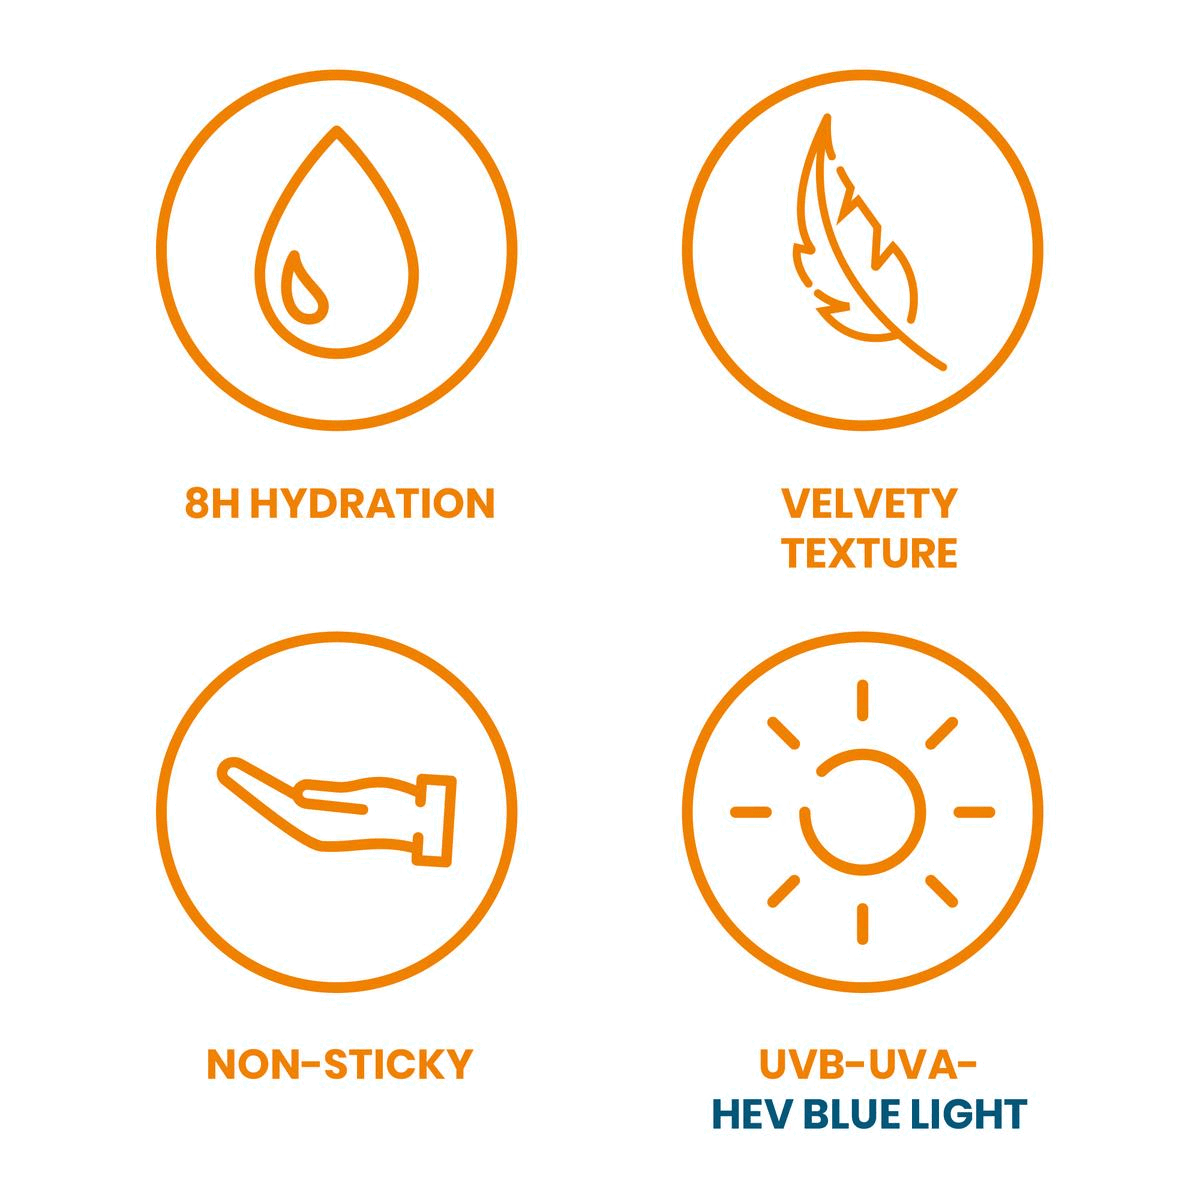 Image 1, 8 hour hydration, velvety texture, non-sticky, UVB_UVA HEV Blue Light. Image 2, Sun Fact - Blue light from the sun can be harmful for the skin, it can accelerate skin ageing and hyperpigmentation. Image 3, product benefits. Image 4, Swatch image with ingredients. Image 5, the range